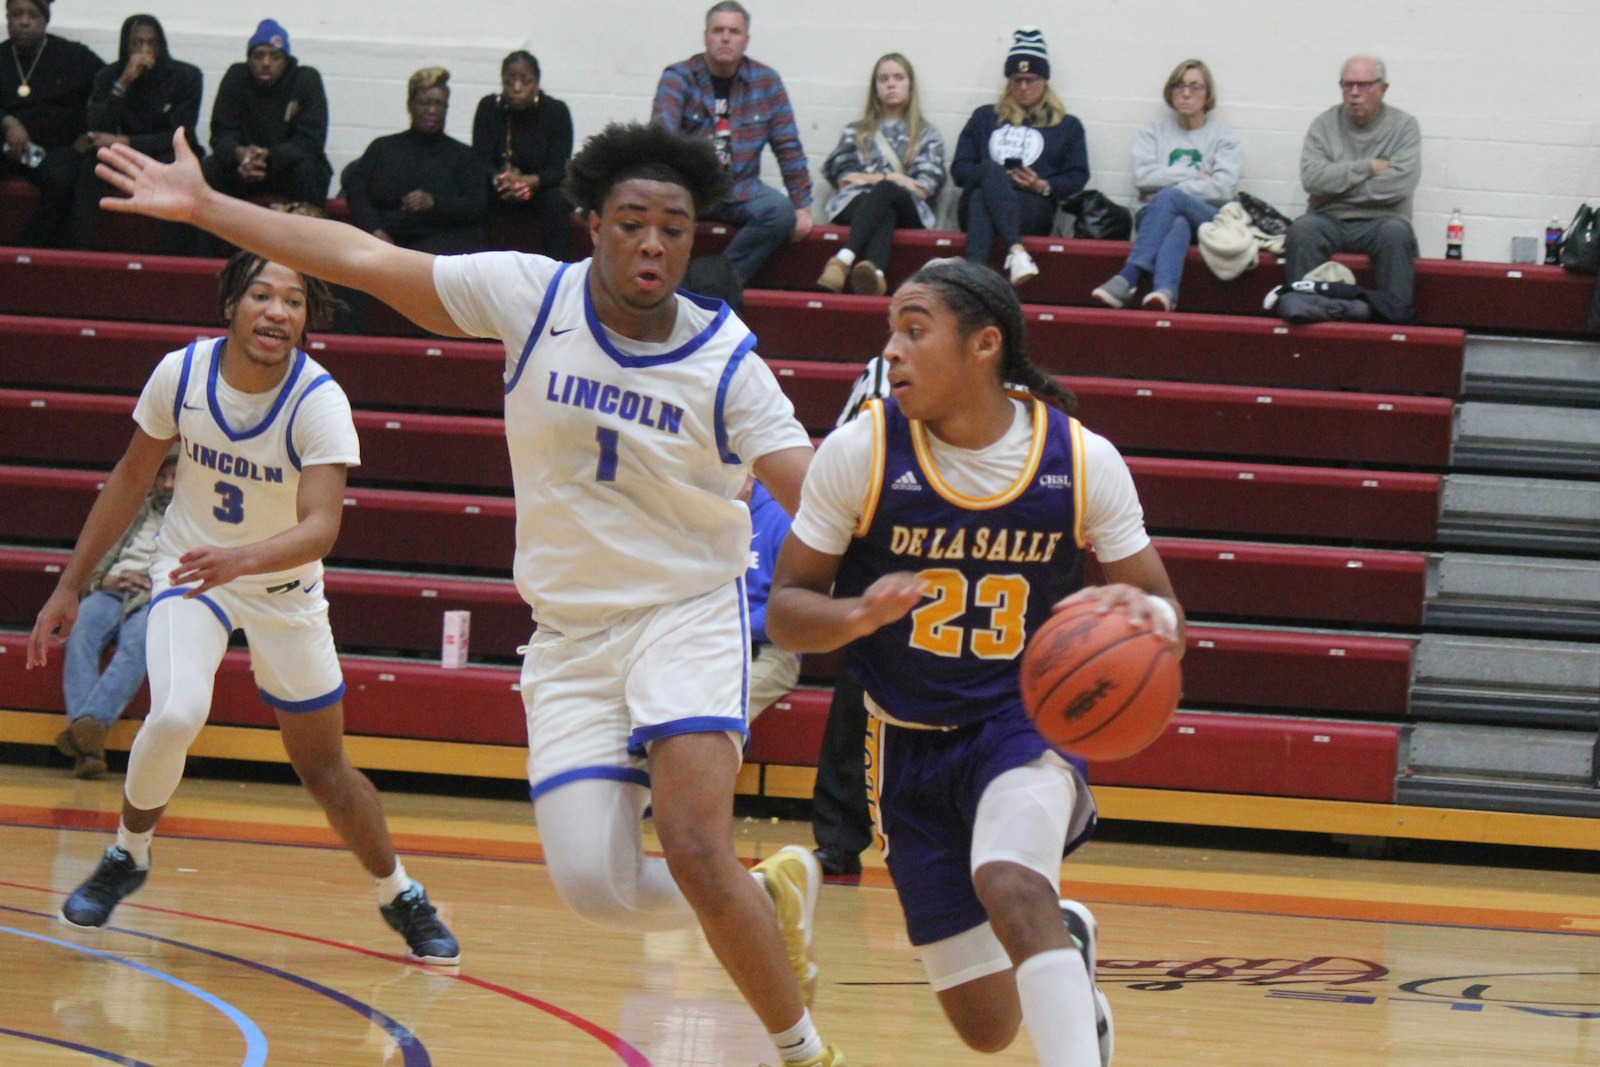 Warren De La Salle sophomore Phoenix Glassnor, driving around Ypsilanti Lincoln’s Jashaun Davis, led all Pilot players with 15 points in a 64-23 win at the University of Detroit Mercy.